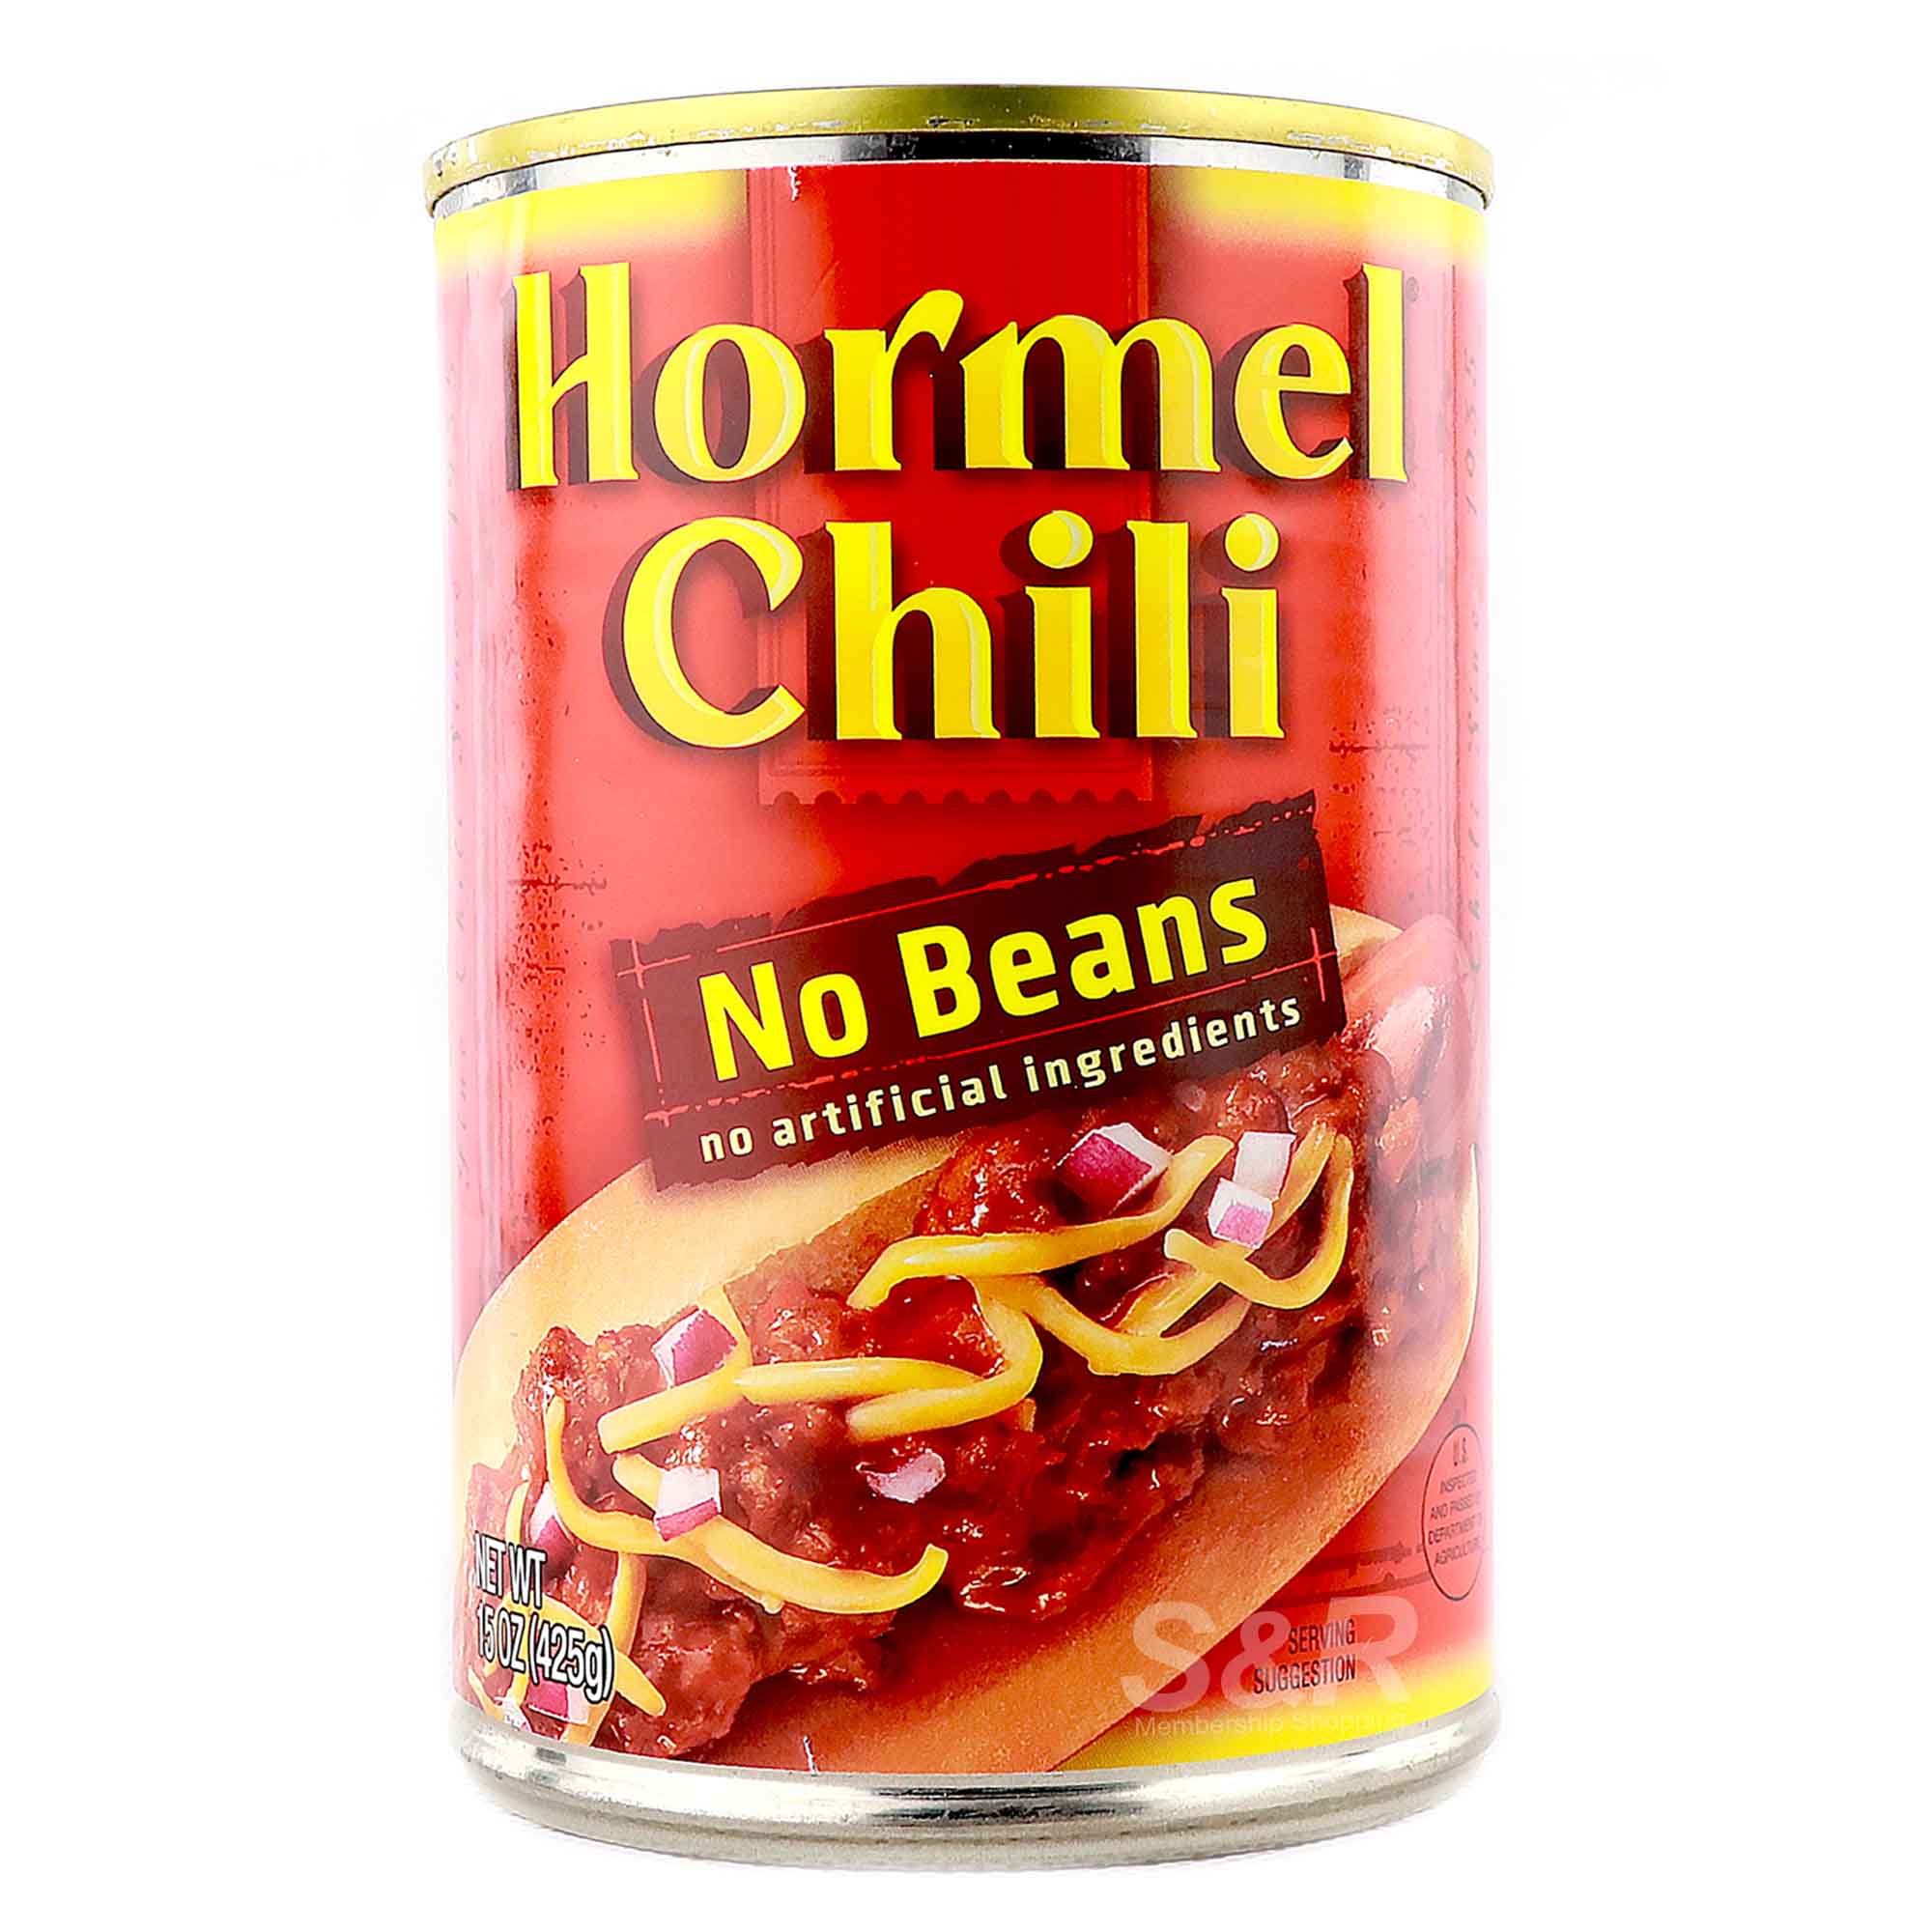 Hormel Chili Canned Meat No Beans 425g